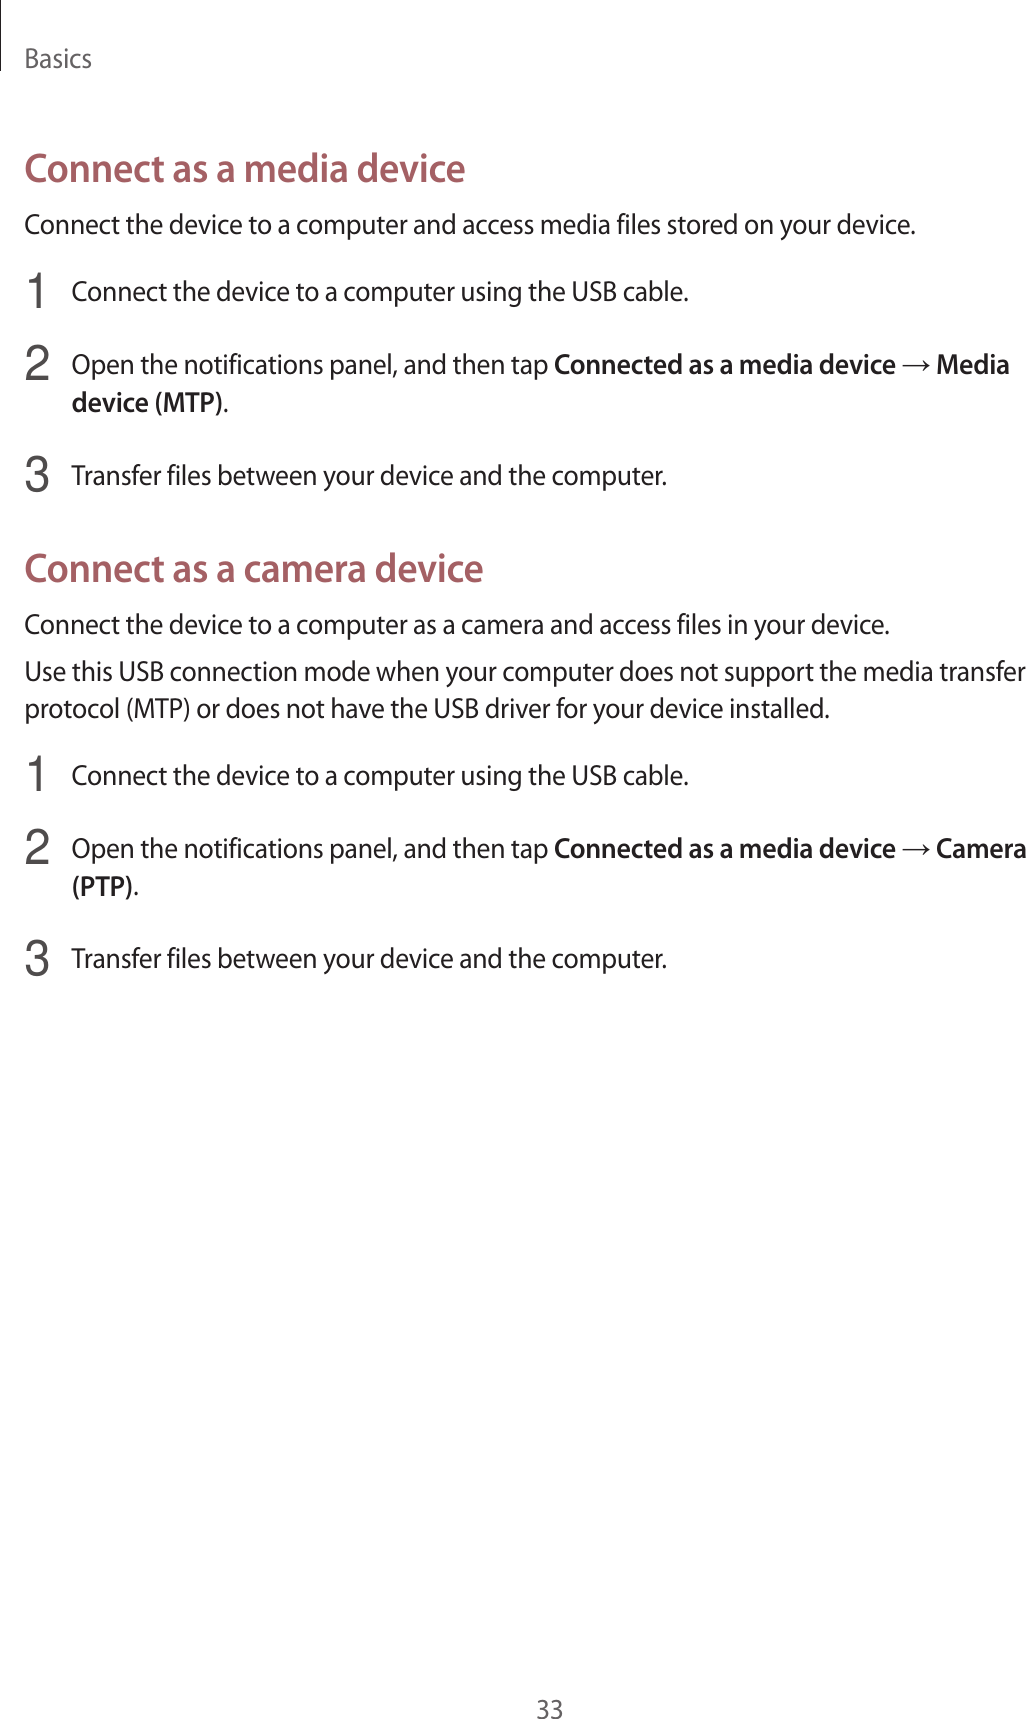 Basics33Connect as a media deviceConnect the device to a computer and access media files stored on your device.1  Connect the device to a computer using the USB cable.2  Open the notifications panel, and then tap Connected as a media device → Media device (MTP).3  Transfer files between your device and the computer.Connect as a camera deviceConnect the device to a computer as a camera and access files in your device.Use this USB connection mode when your computer does not support the media transfer protocol (MTP) or does not have the USB driver for your device installed.1  Connect the device to a computer using the USB cable.2  Open the notifications panel, and then tap Connected as a media device → Camera (PTP).3  Transfer files between your device and the computer.